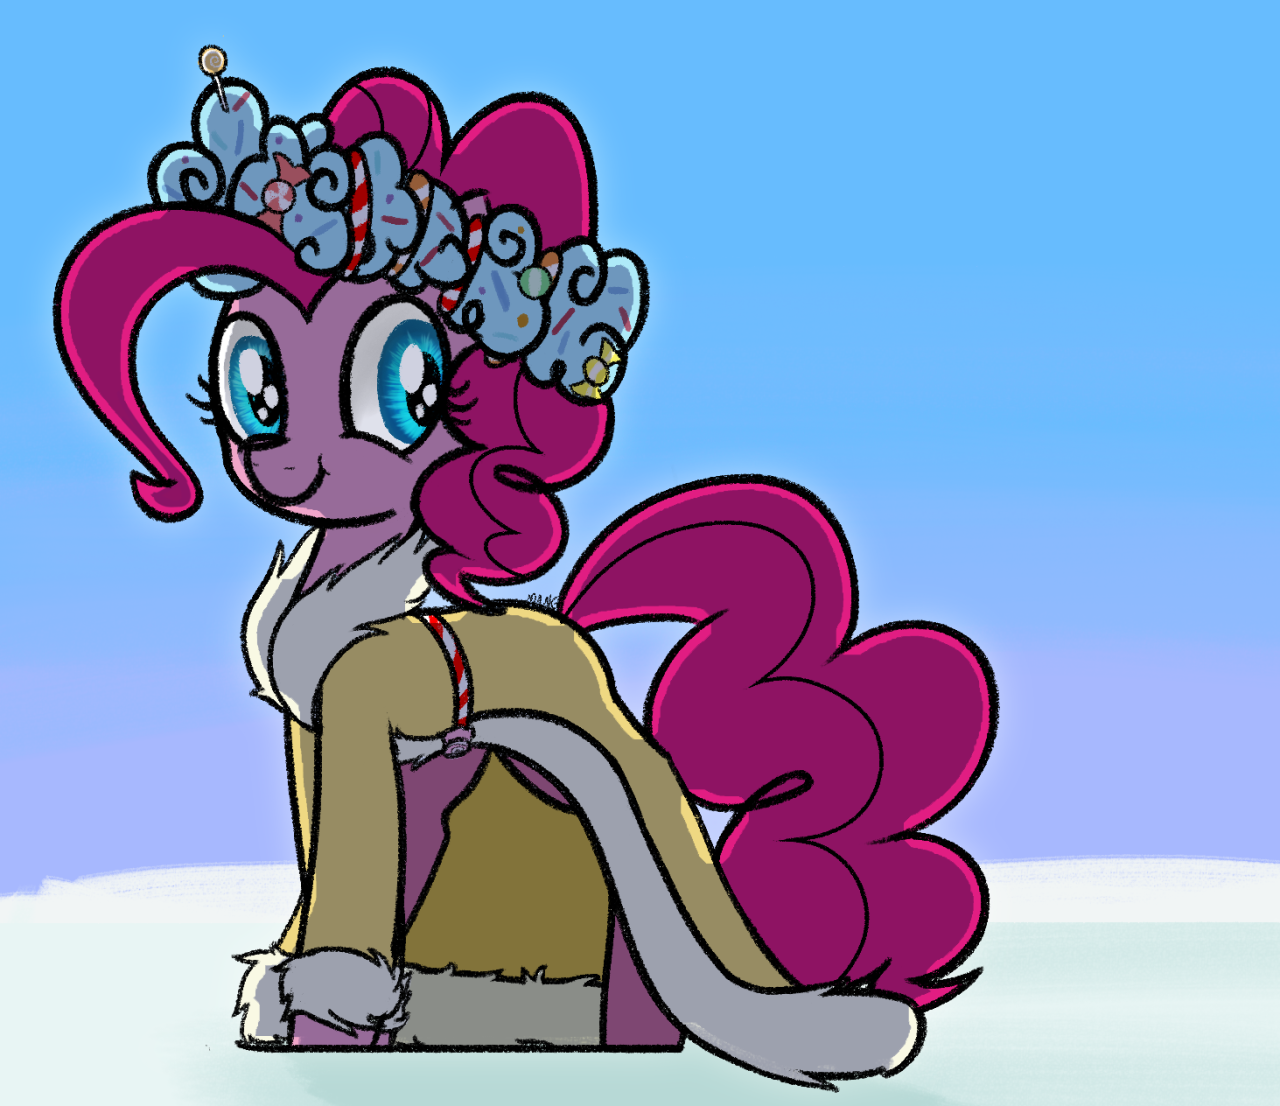 mangs-art: Happy Hearth’s Warming eve!!! quick thing before i head to work ^w^